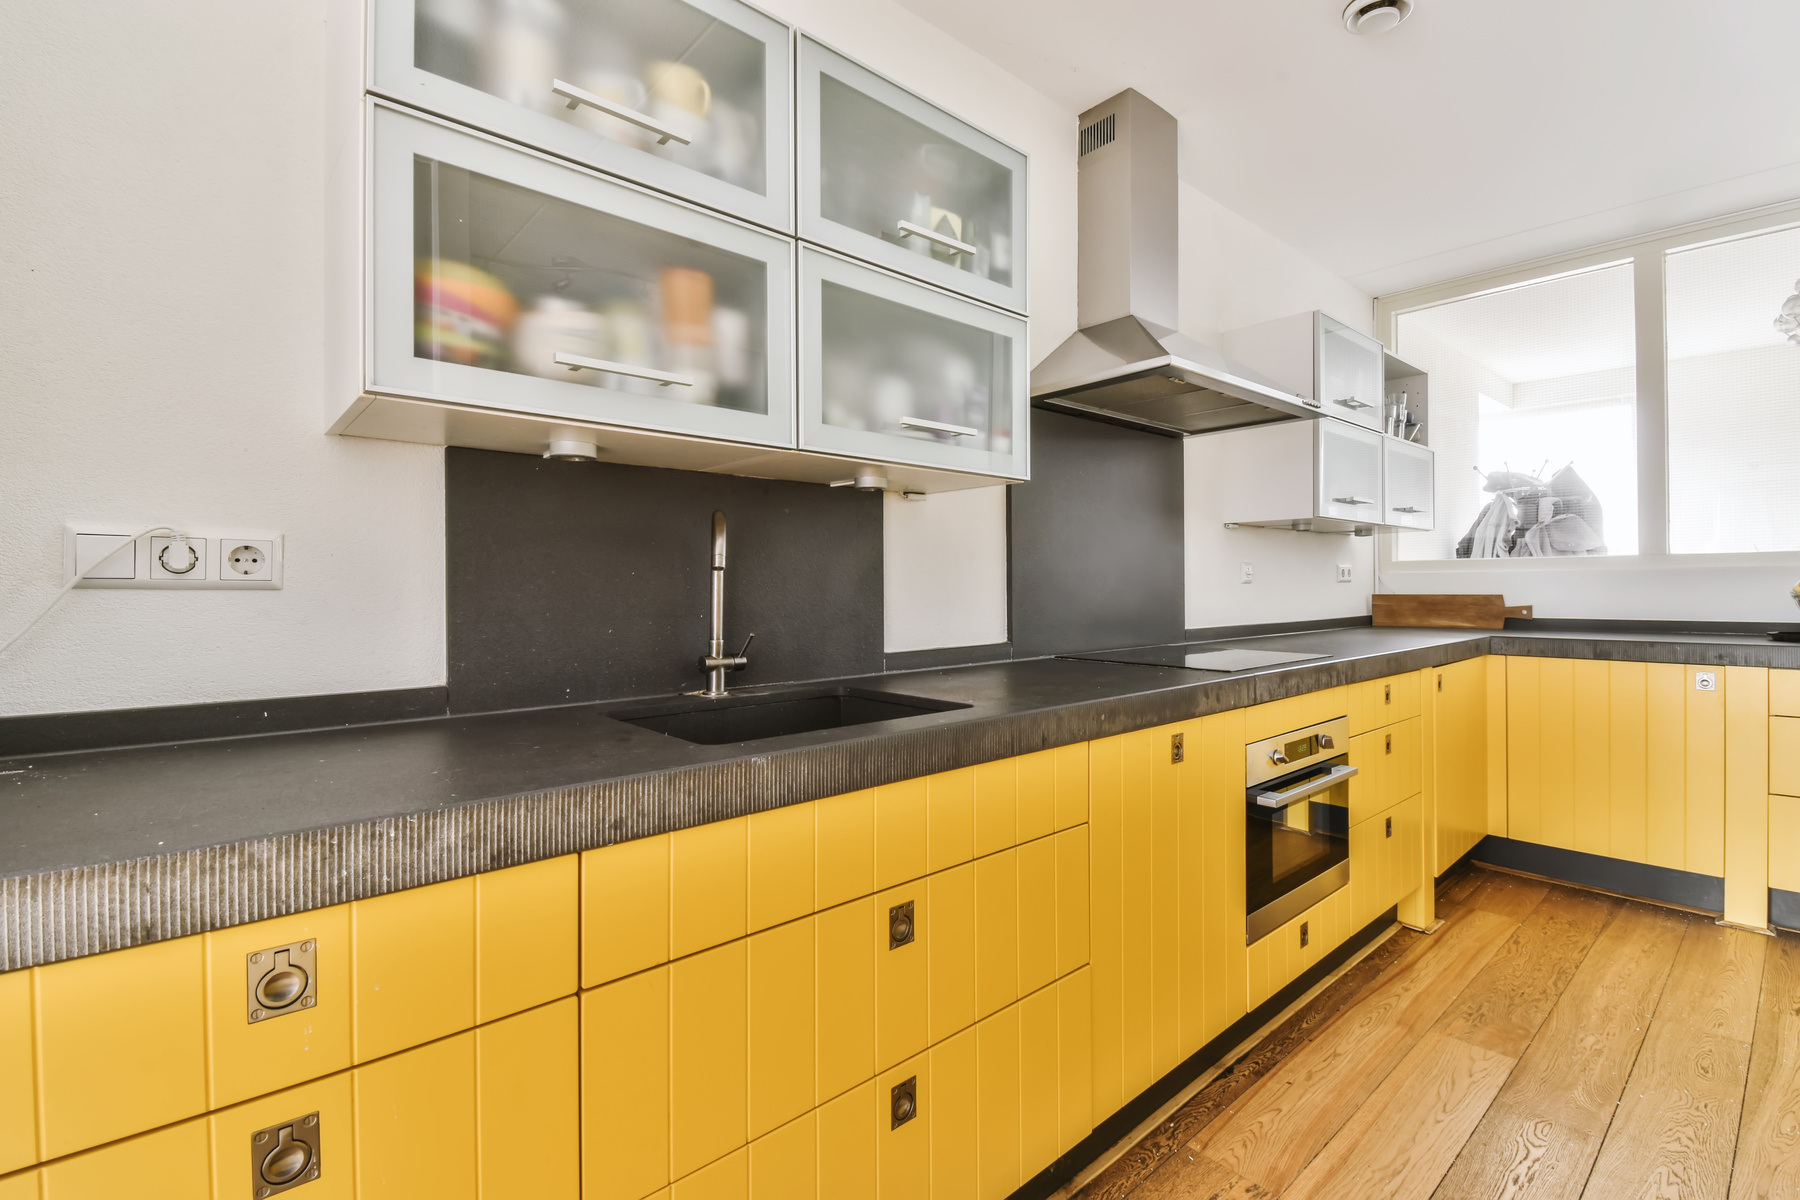 Pretty Kitchen with Yellow Kitchen Unit and Hanging Cabinets